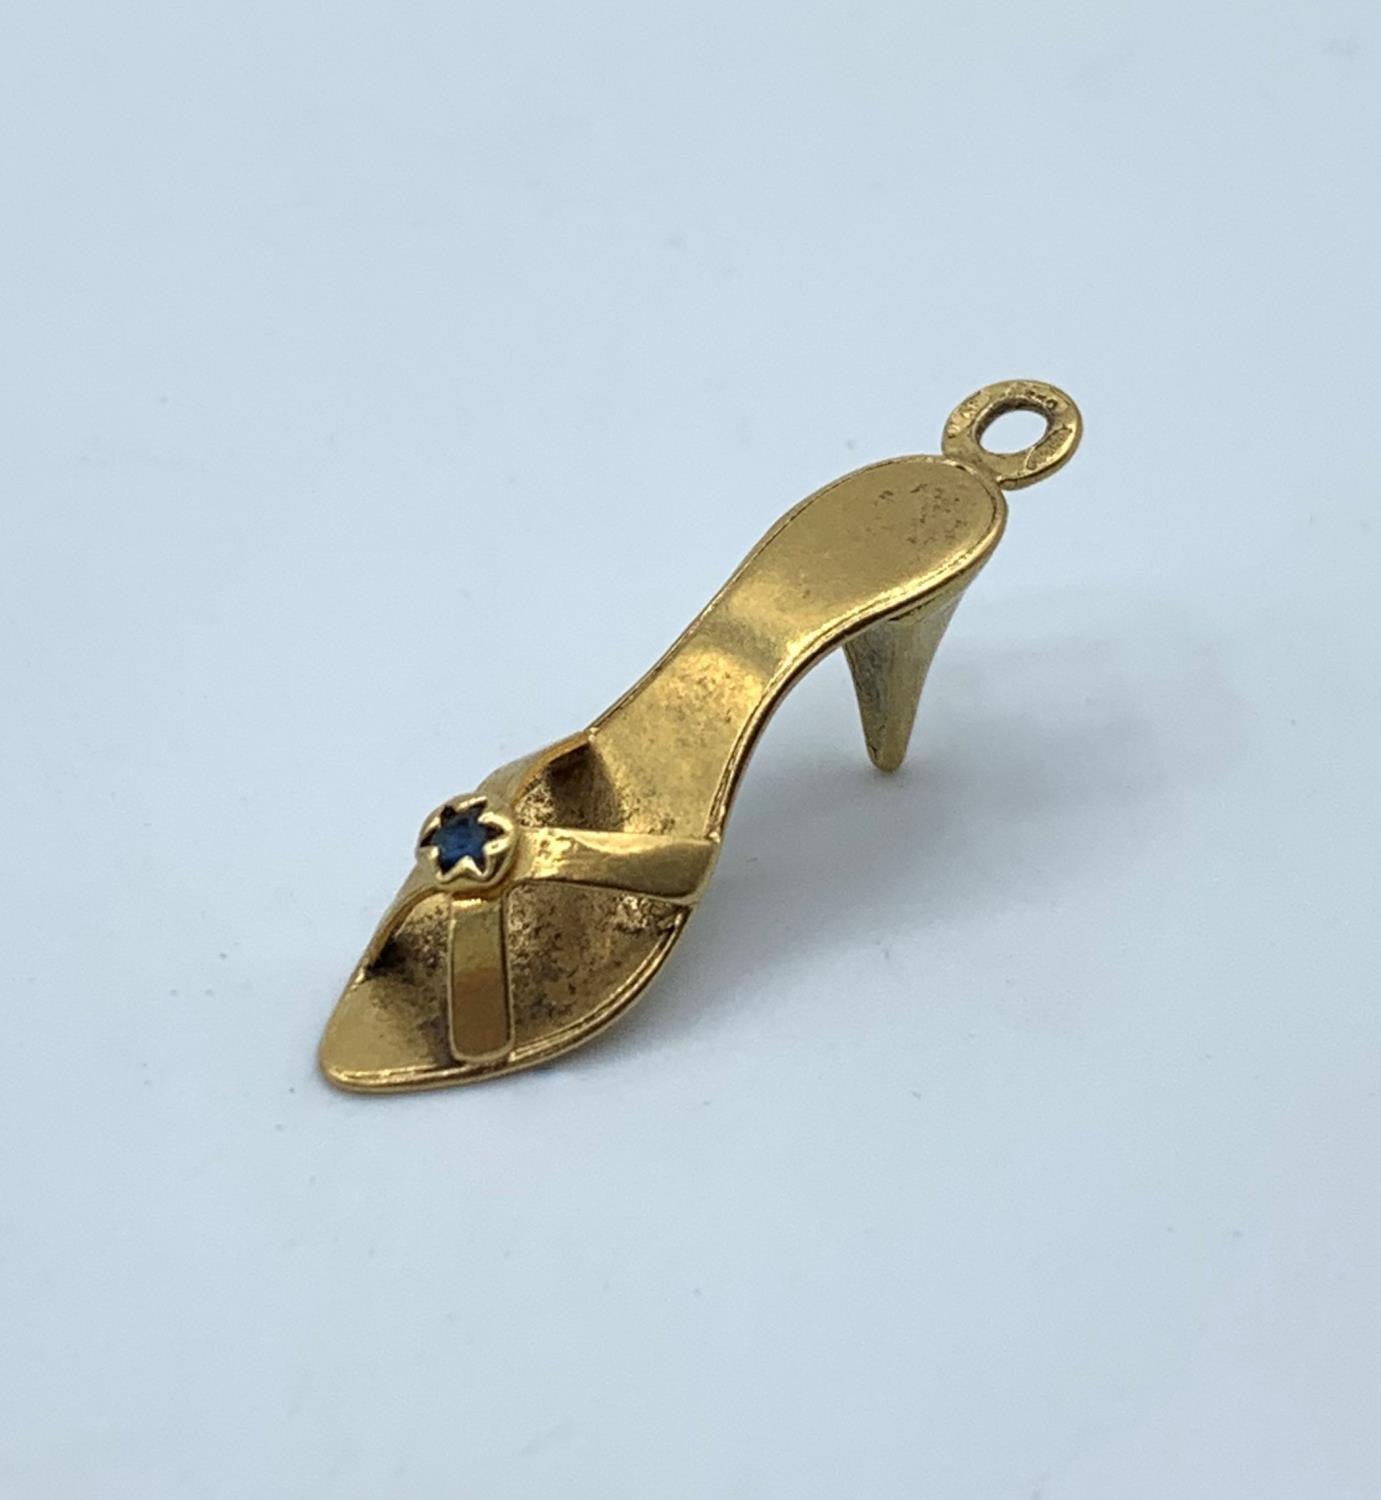 9ct Gold Shoe Charm/Pendant, weight 2.7g and 3cm long - Image 4 of 6